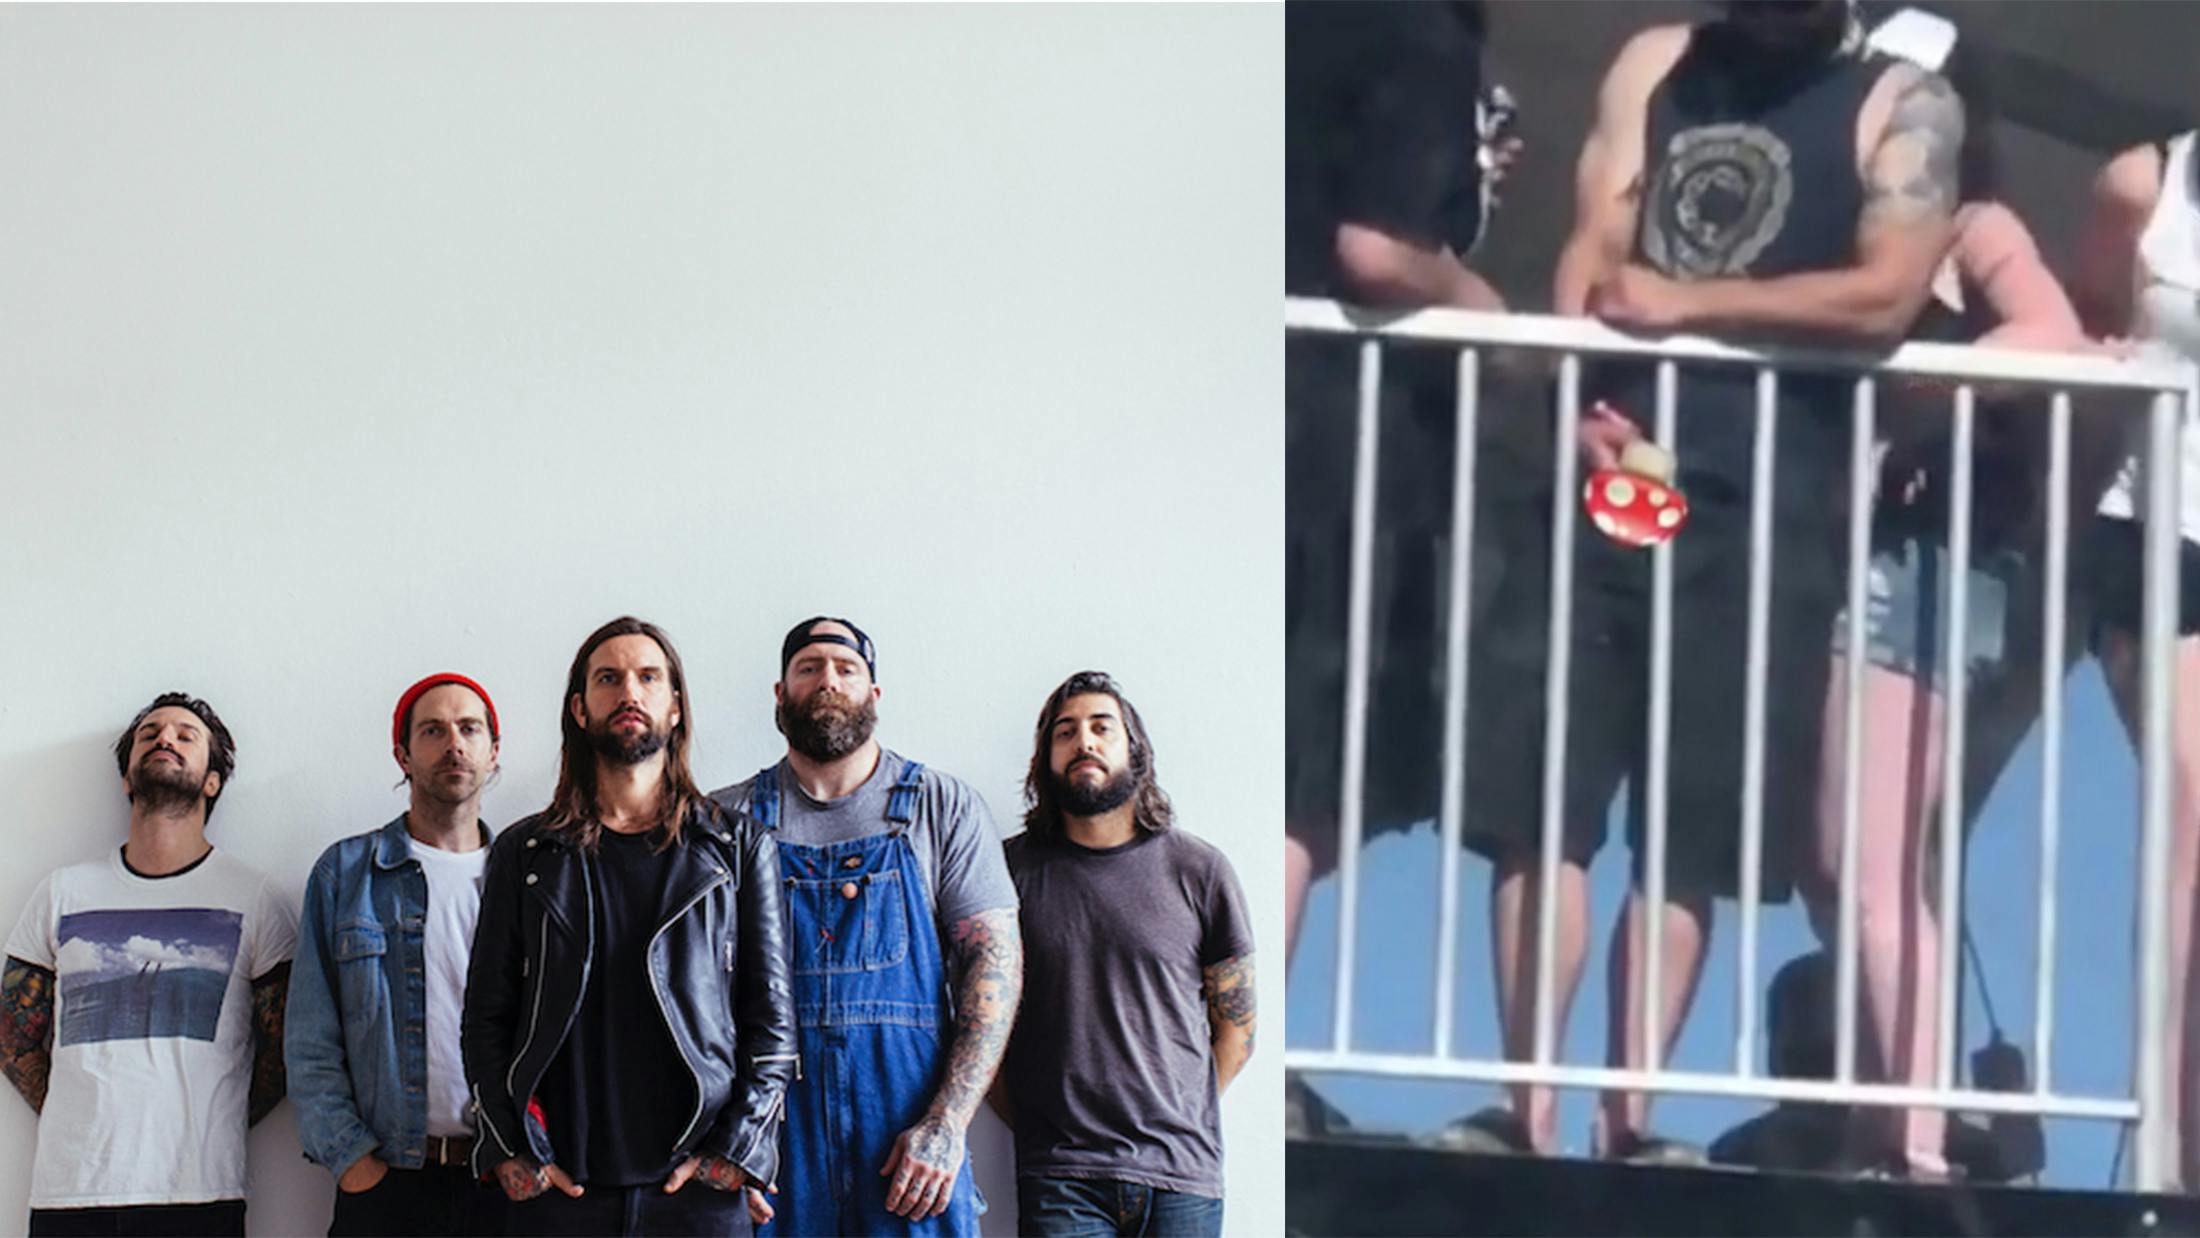 Man Urinates On Festival Attendees Following Every Time I Die Set